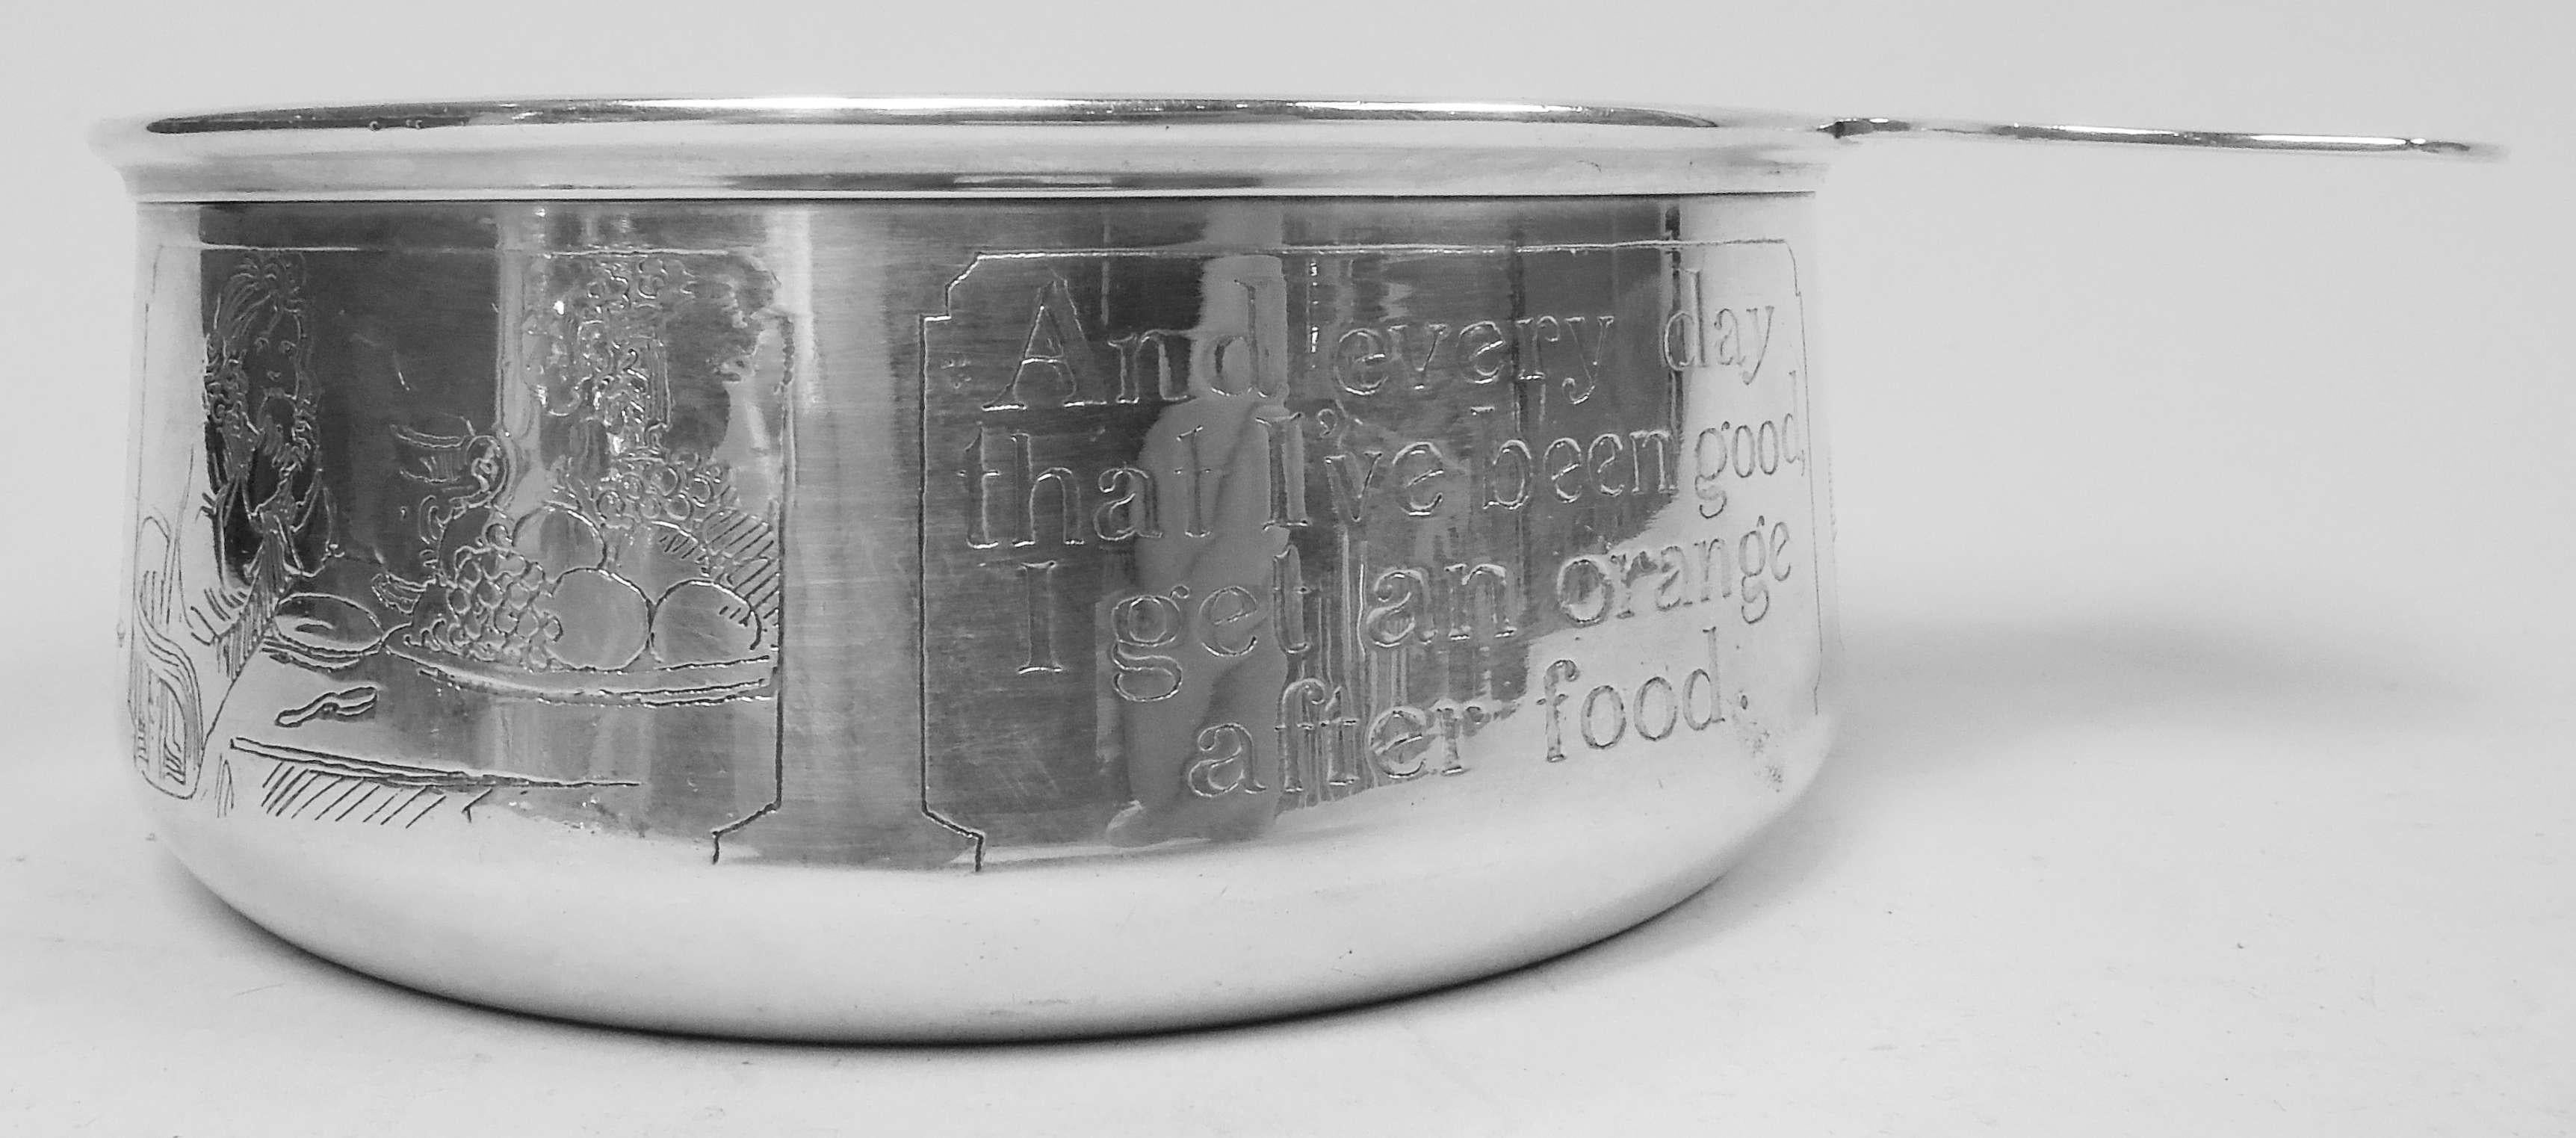 Edwardian sterling silver porringer. Made by William B. Kerr in Newark, ca 1910. Round with gently upward tapering sides and solid shaped handle. Rectilinear frames with etched scenes of girl kneeling in prayer, feasting from a fruit platter, and